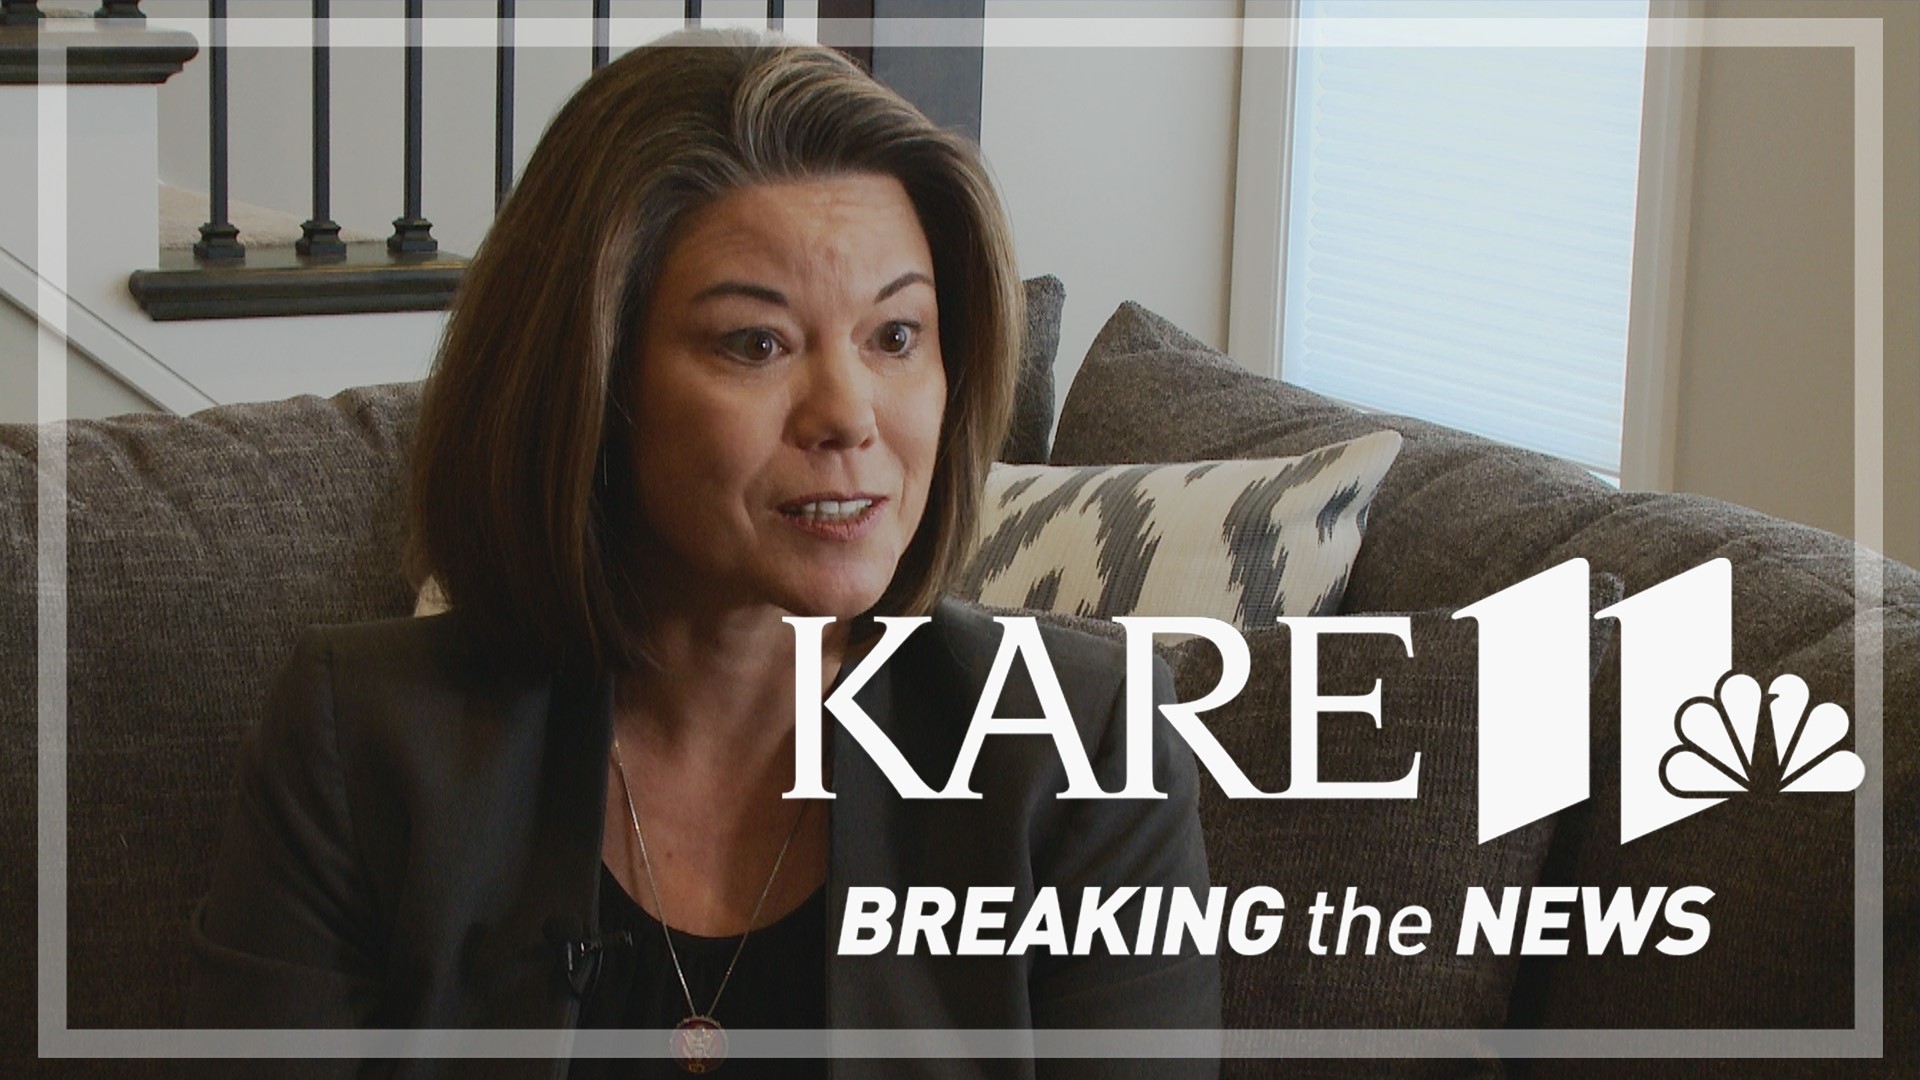 The Minnesota Democrat described the assault in detail for the first time during an interview with KARE 11's Jana Shortal.